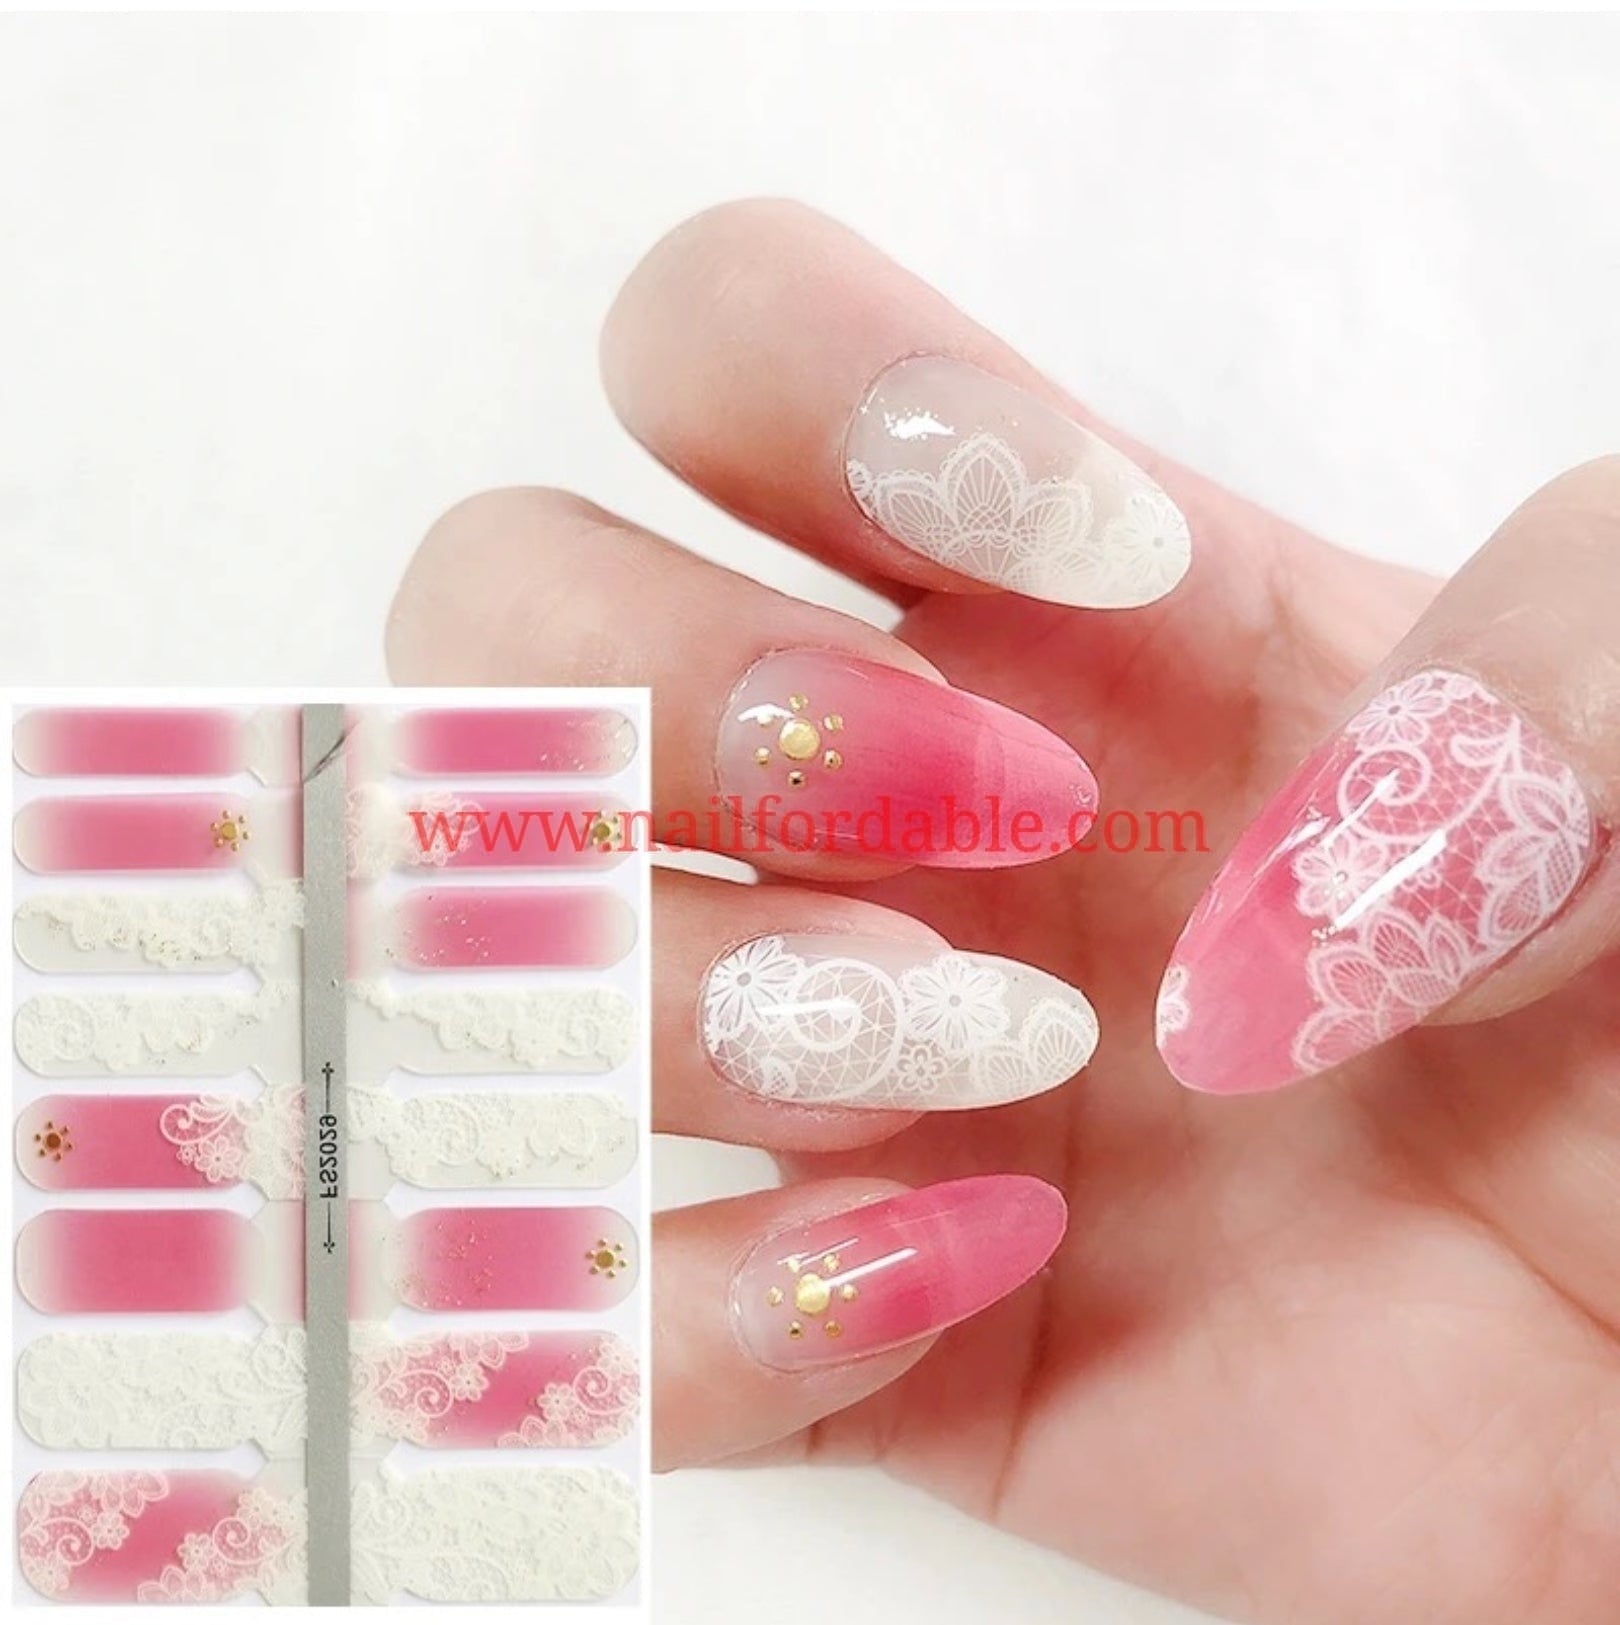 White floral lace Crystal Wraps Nail Wraps | Semi Cured Gel Wraps | Gel Nail Wraps |Nail Polish | Nail Stickers